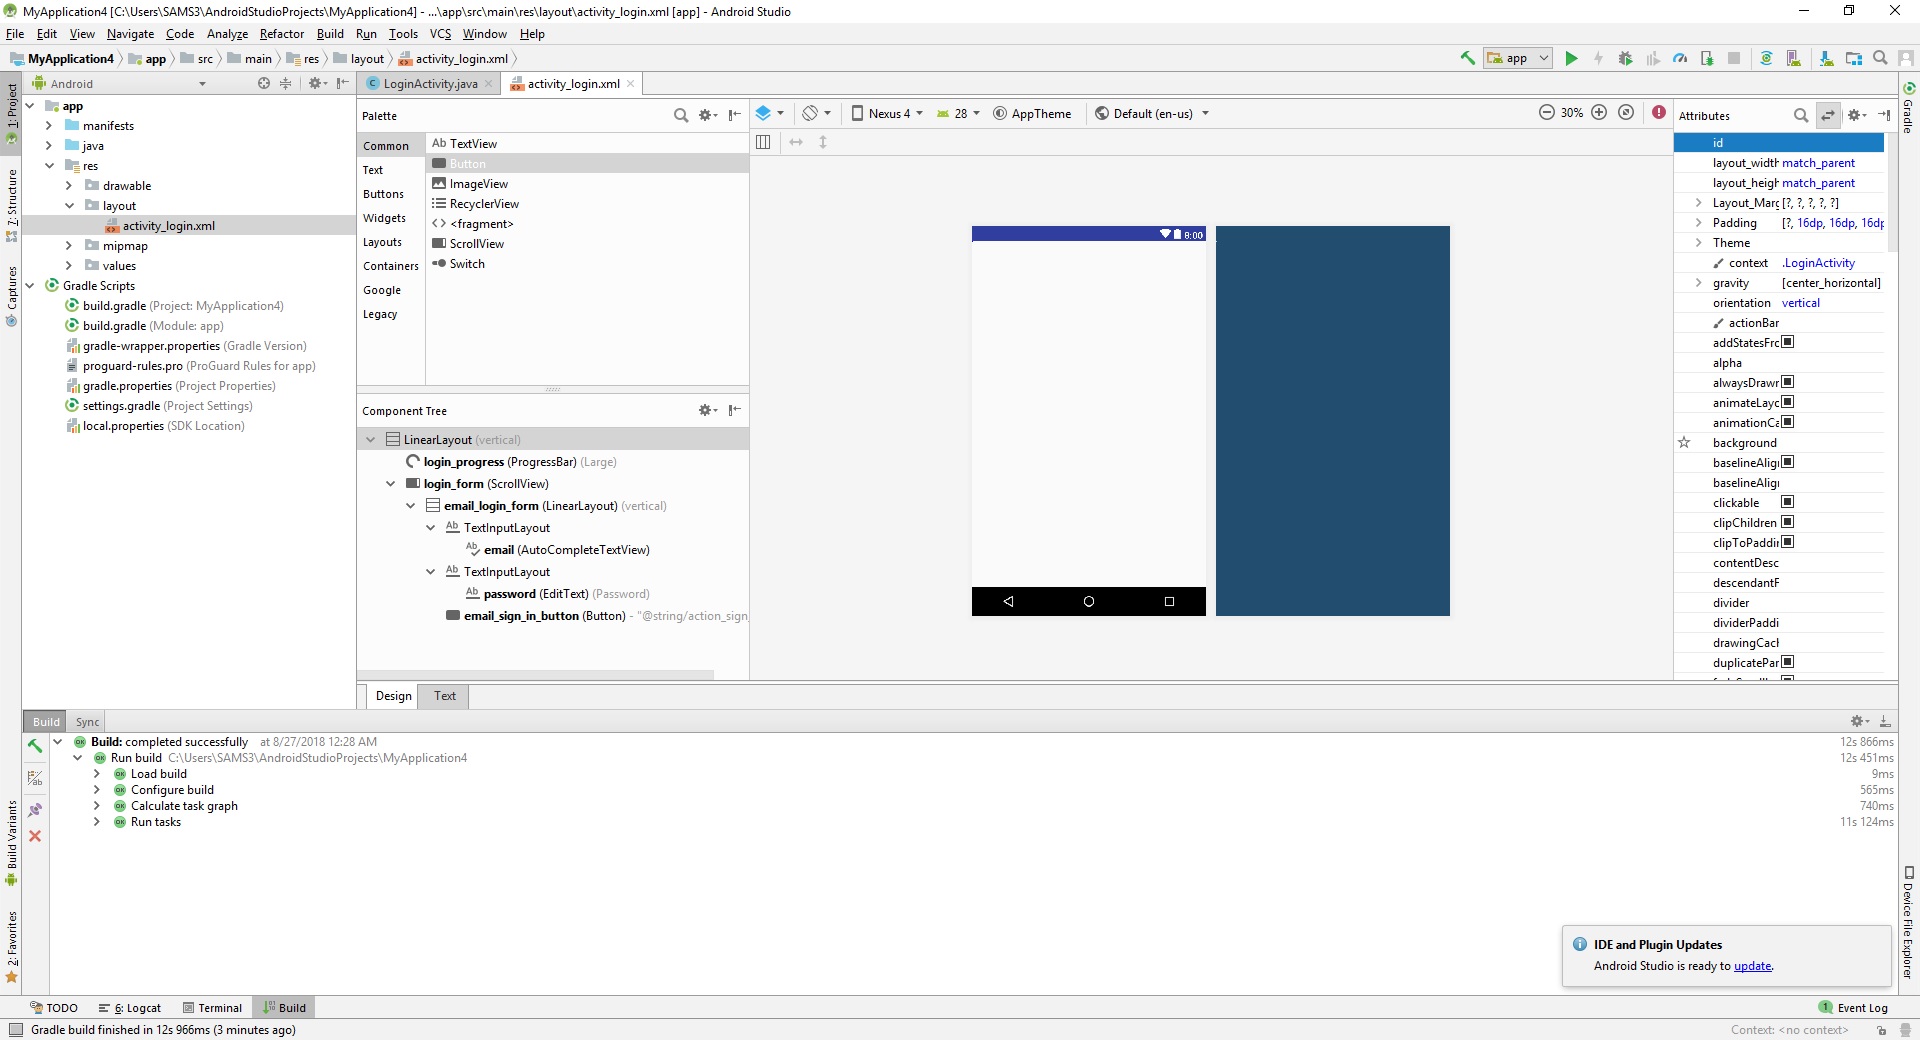 Android studio: Why TextView, Buton, etc are not Visible in Design Editor.  | Android Forums